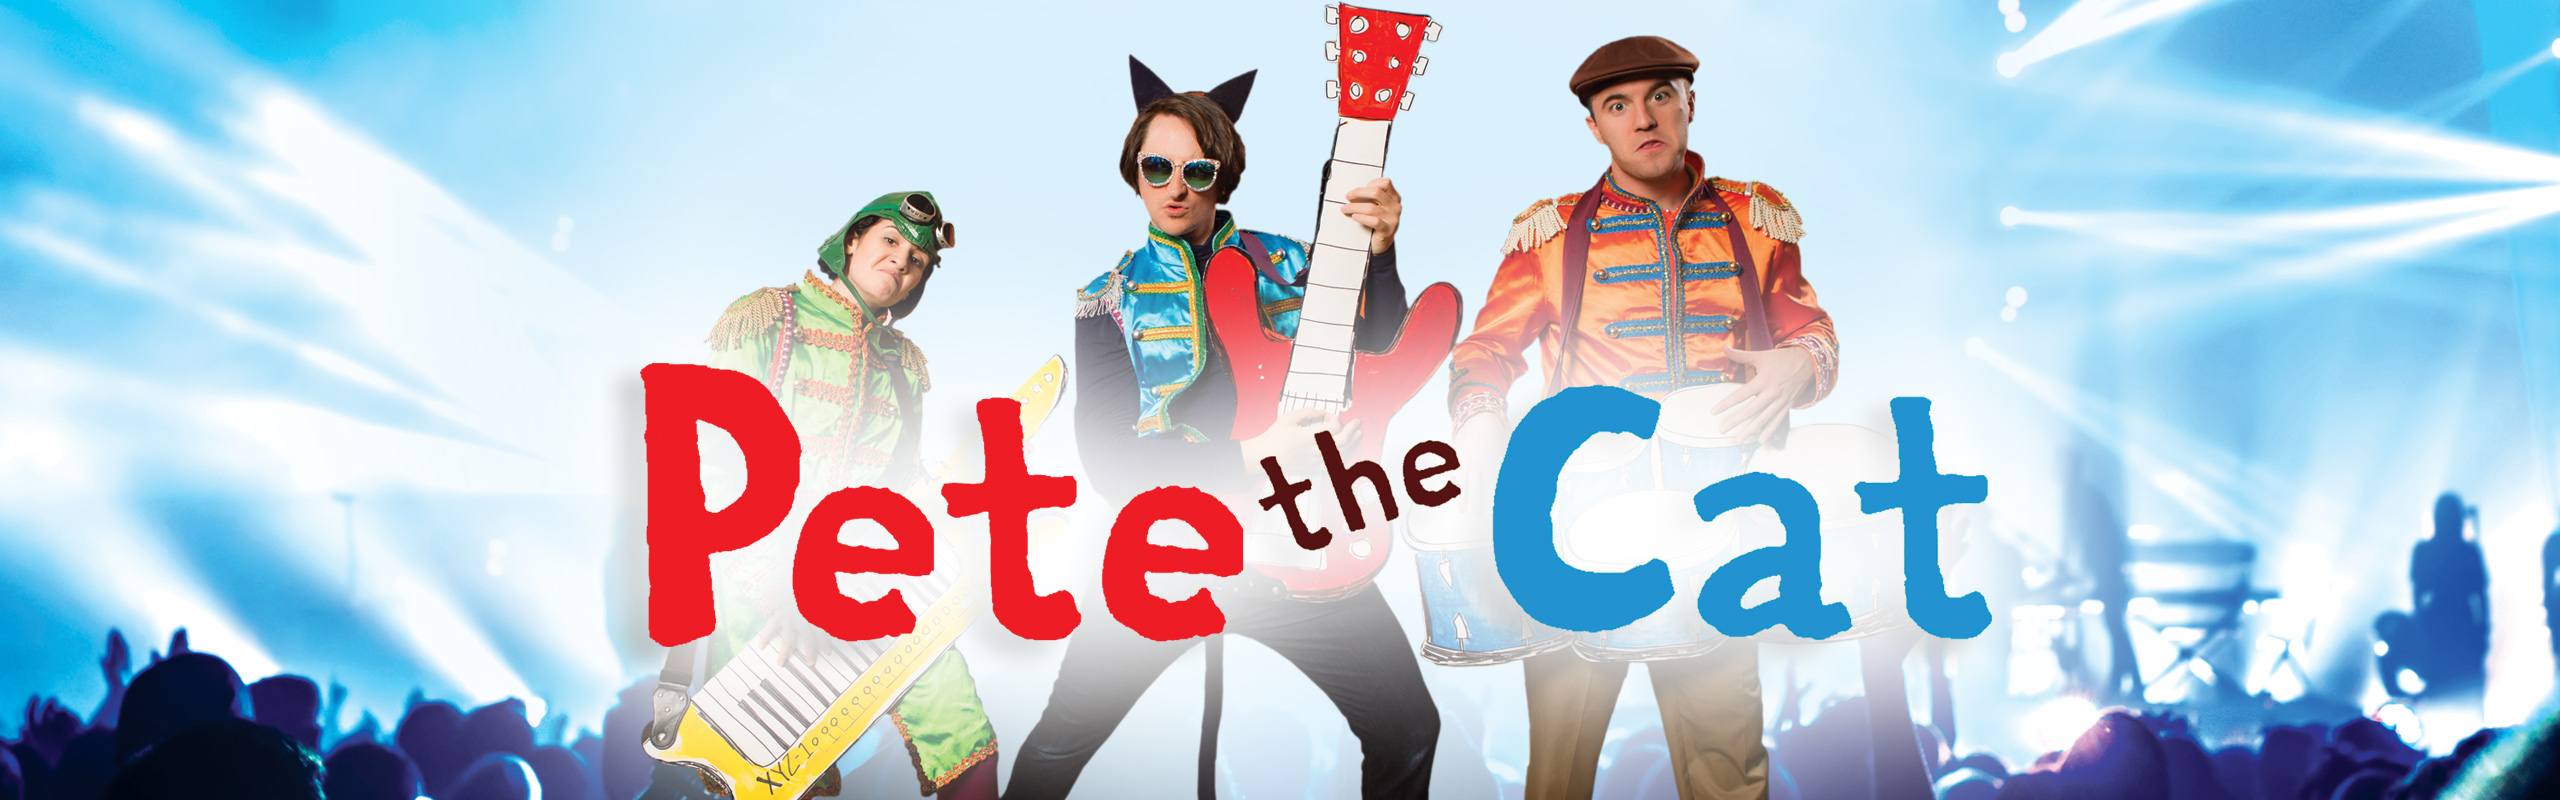 Picture of Pete the Cat show - Performing Arts and Leadership